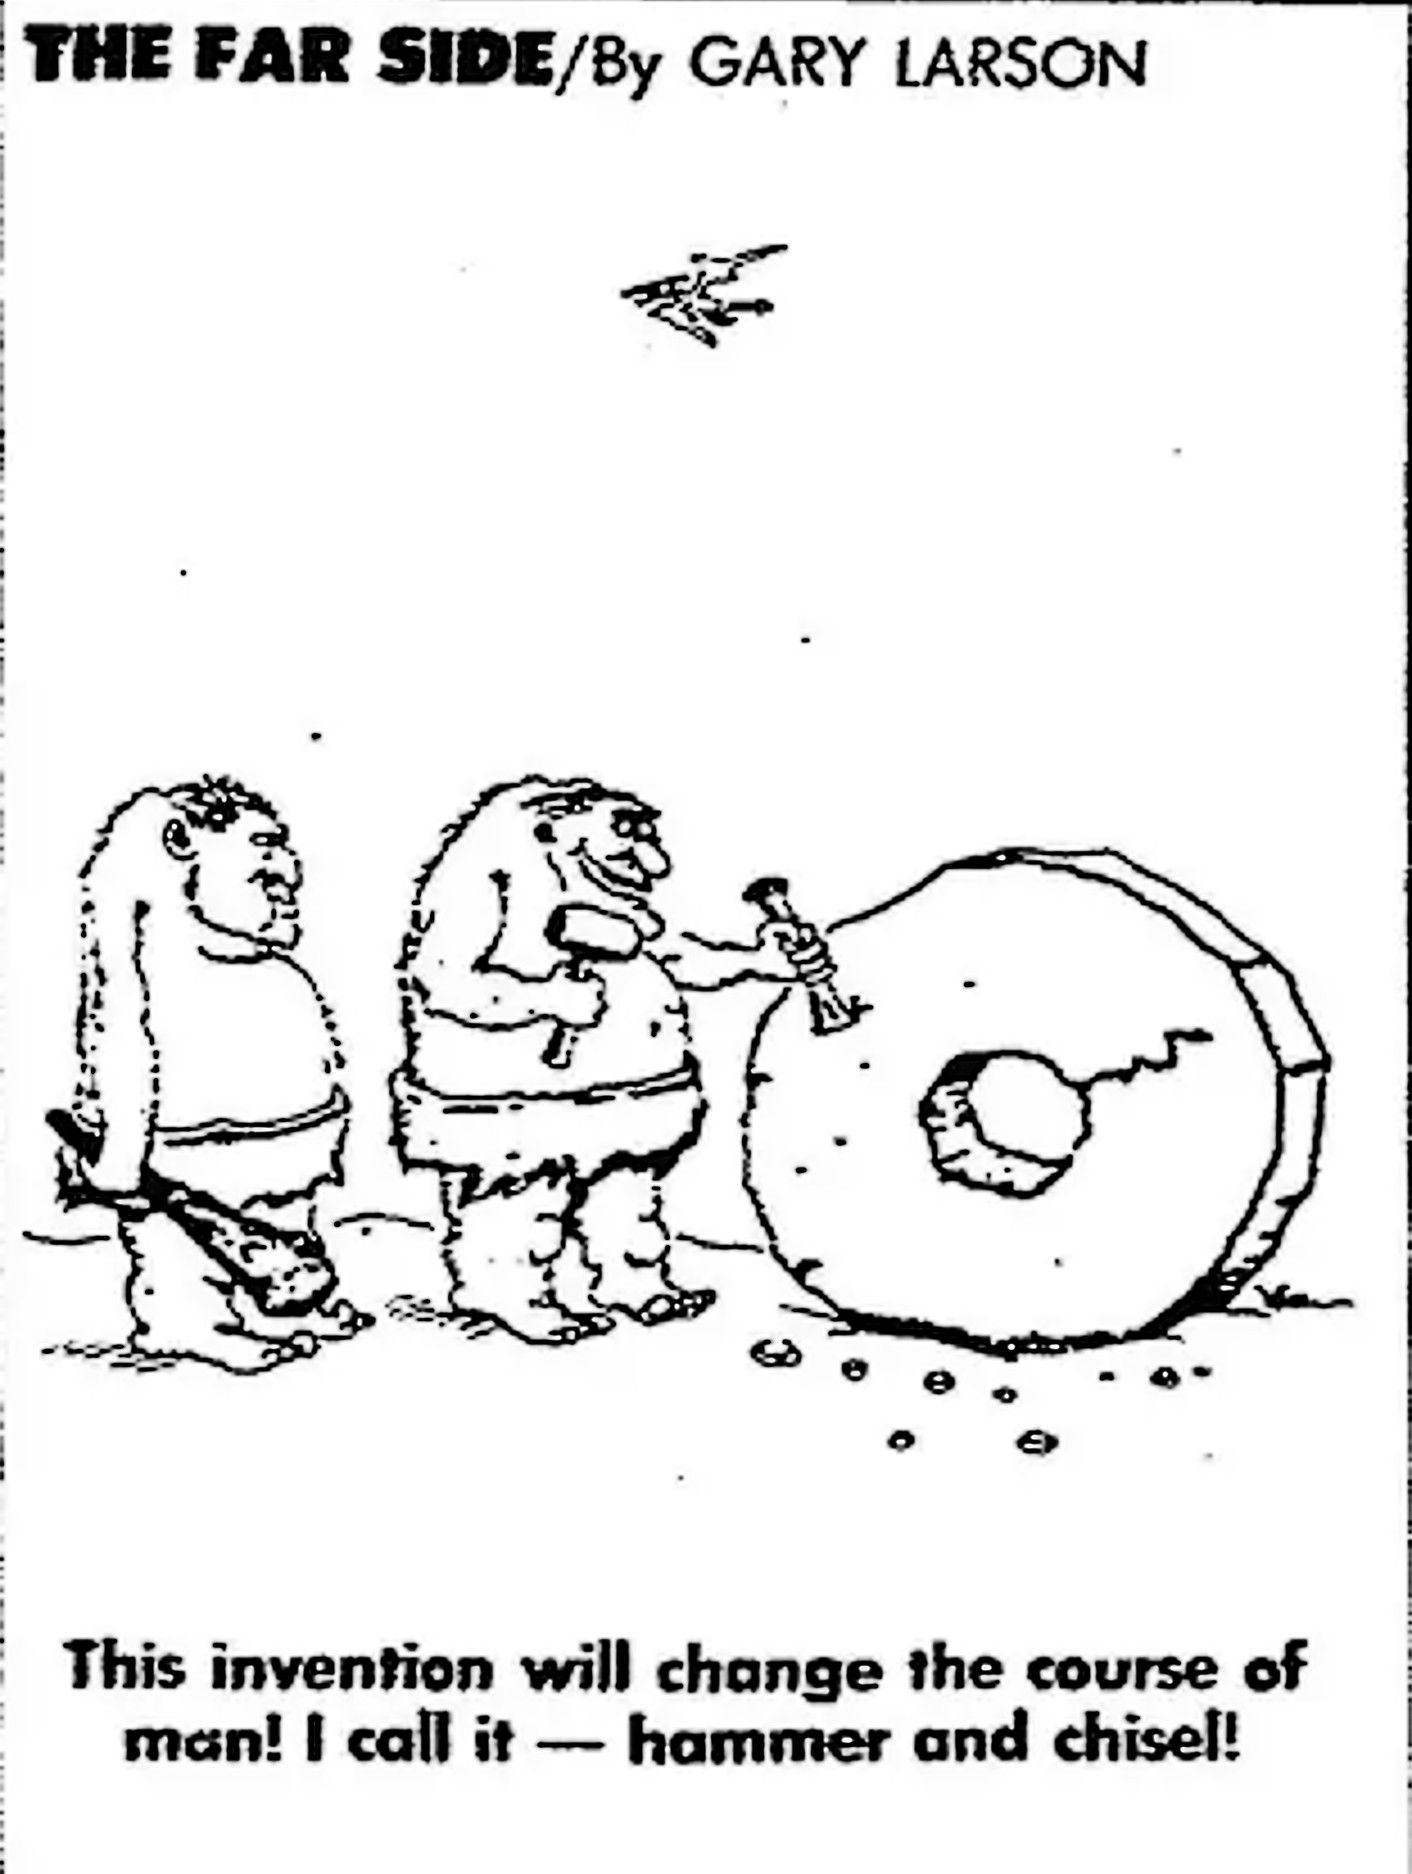 The First Far Side comic, caveman invents hammer and chisel